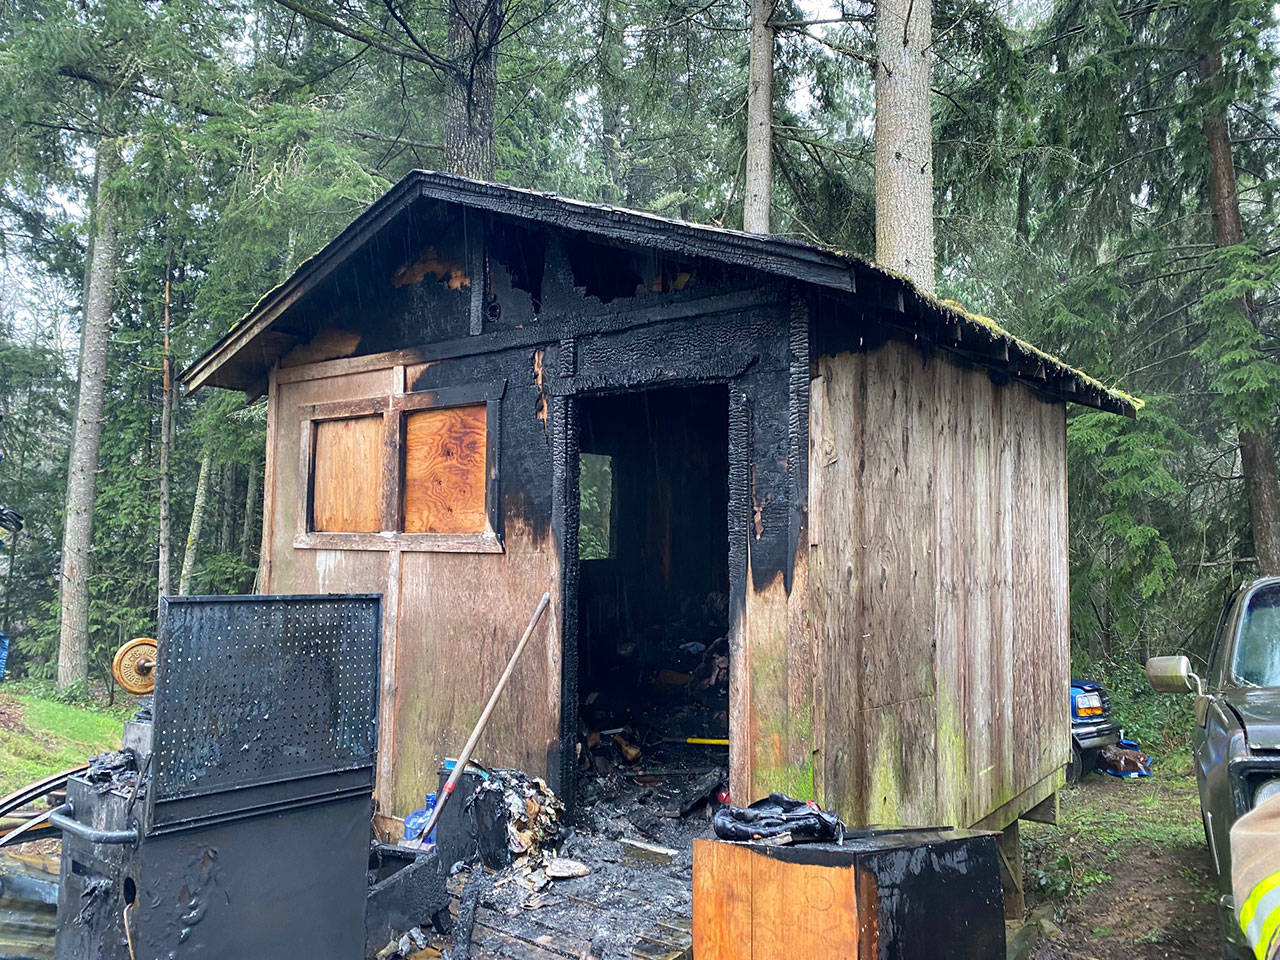 <em>NKF&R crews quickly extinguished a fire, thought to have been sparked by a cellphone charging cord, in a sleeping cabin near Kingston on Wednesday morning but were unable to save two pet reptiles trapped inside.</em>Photo courtesy of NKF&R